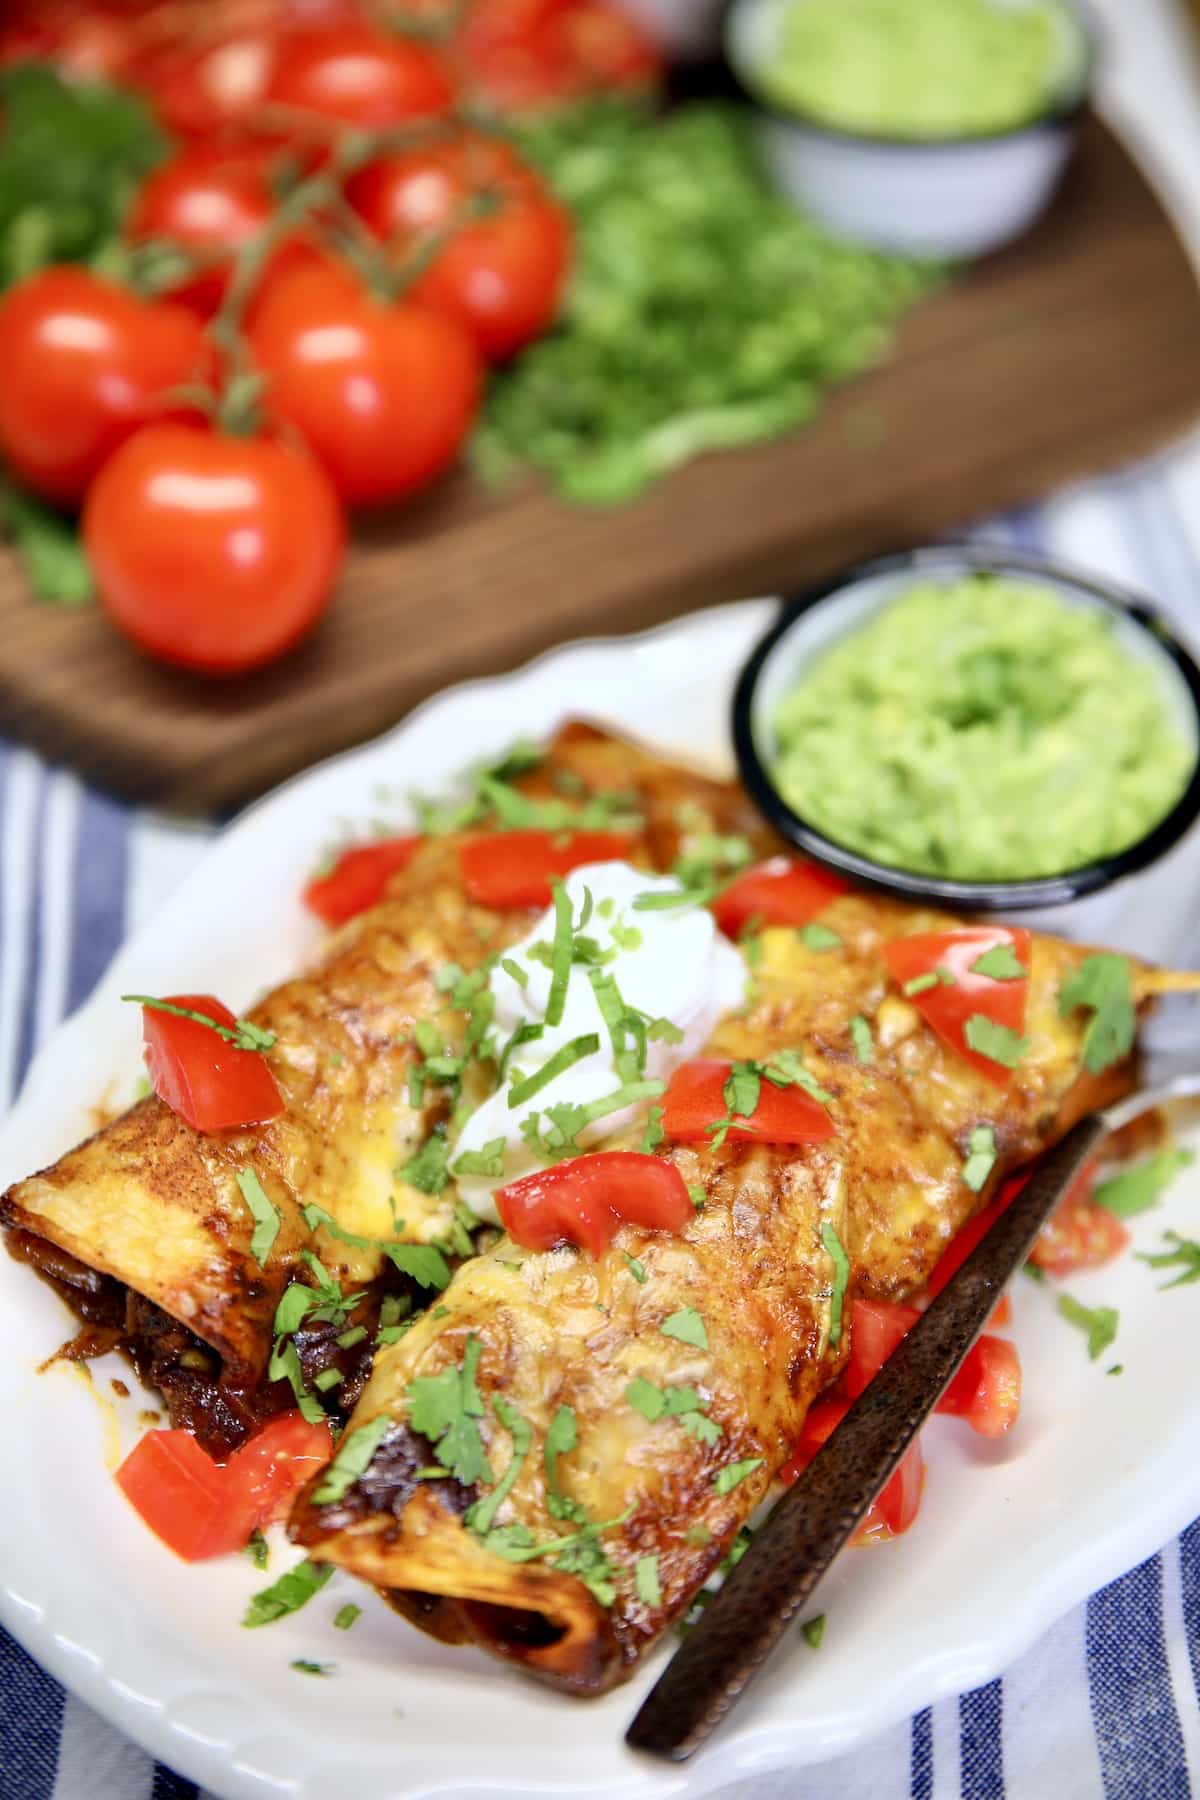 Plate of enchiladas with guacamole, tomatoes, sour cream.